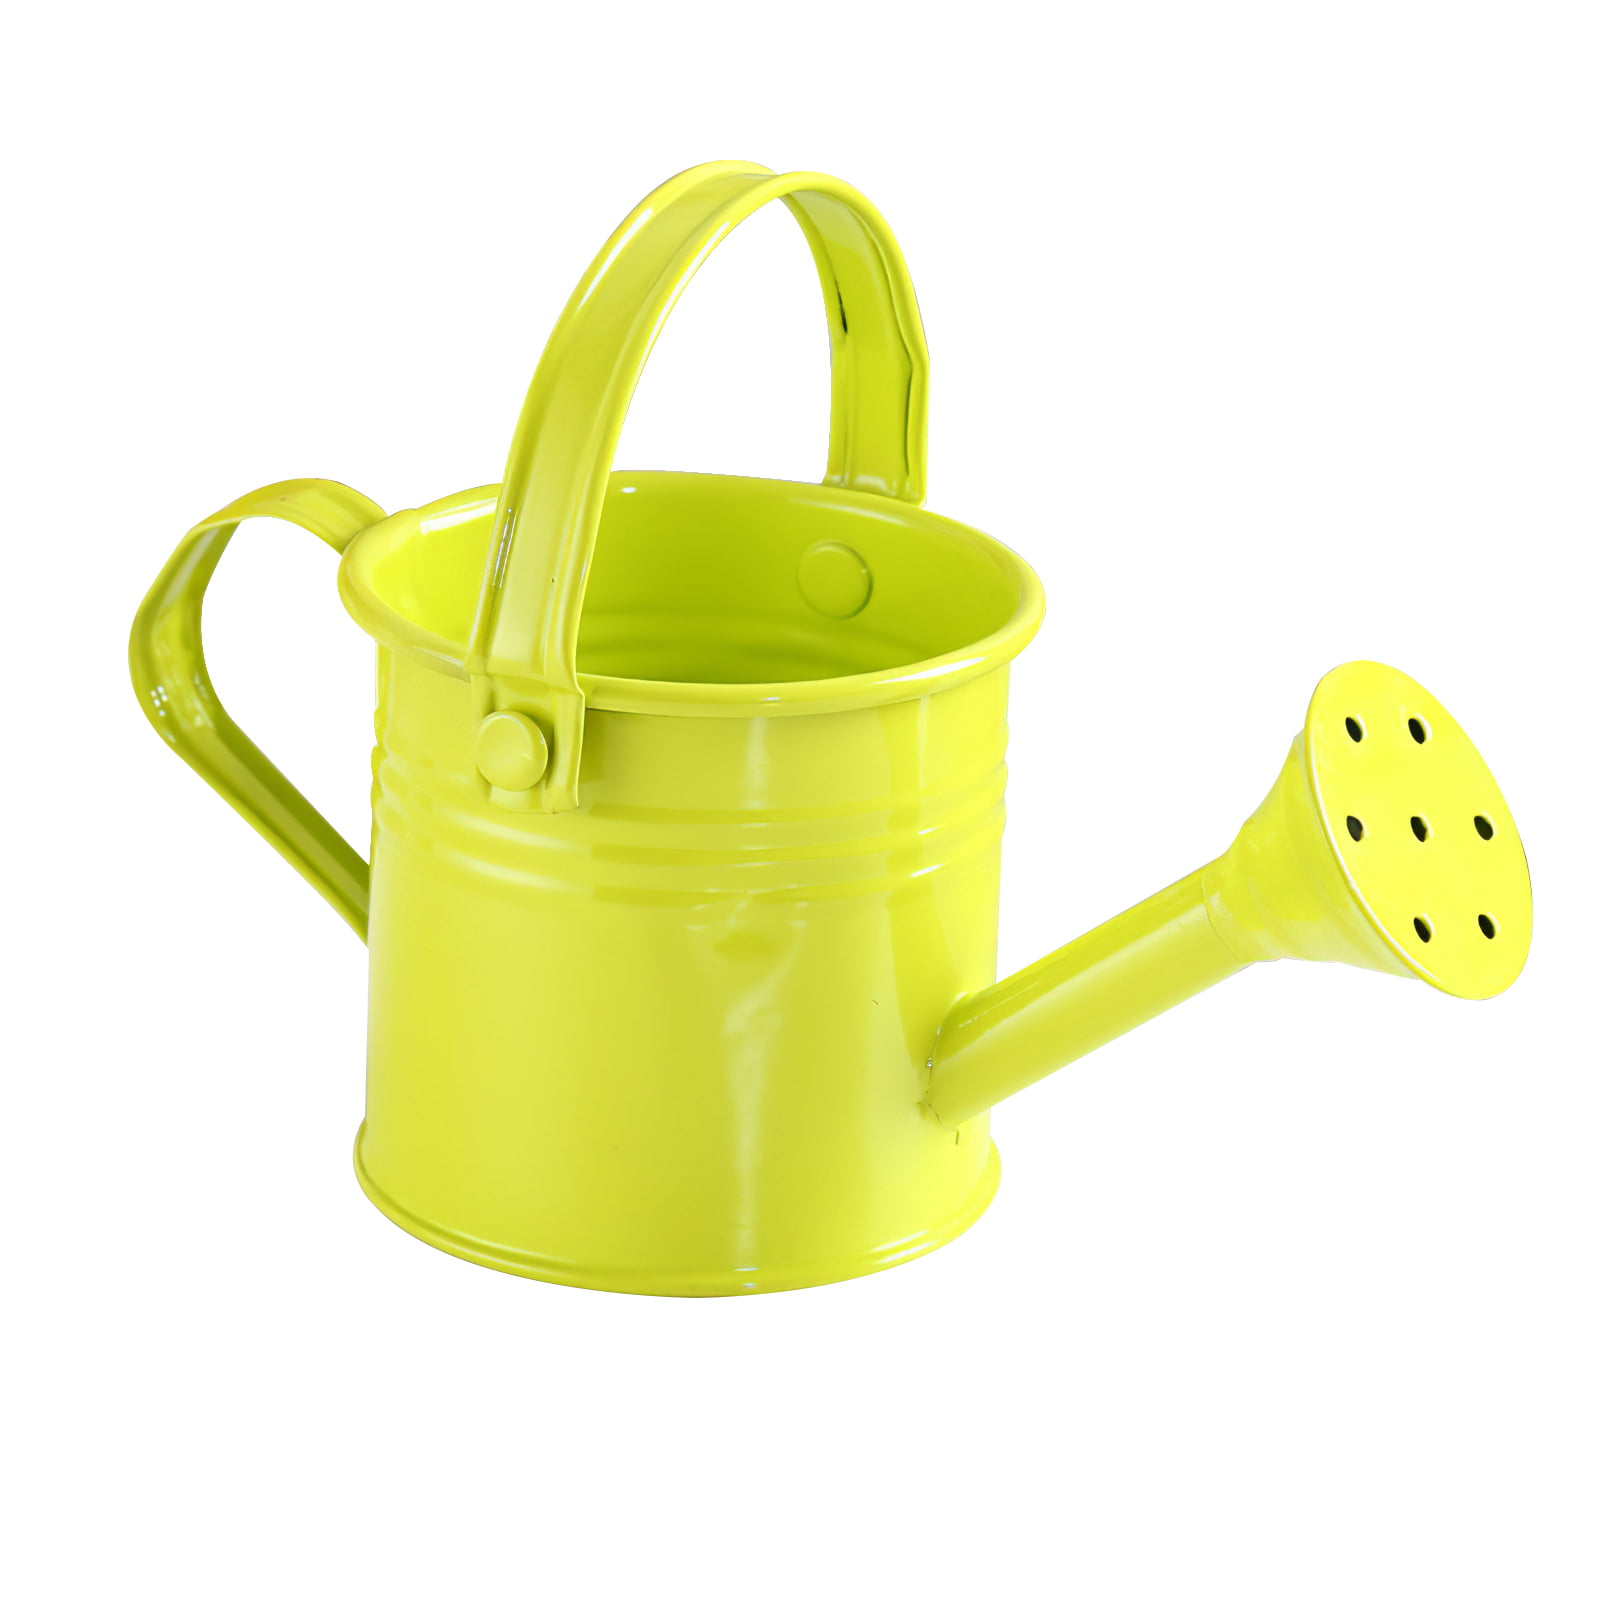 with Long Spout Ergonomic Handle made in the USA Durable Watering Can 48 oz 